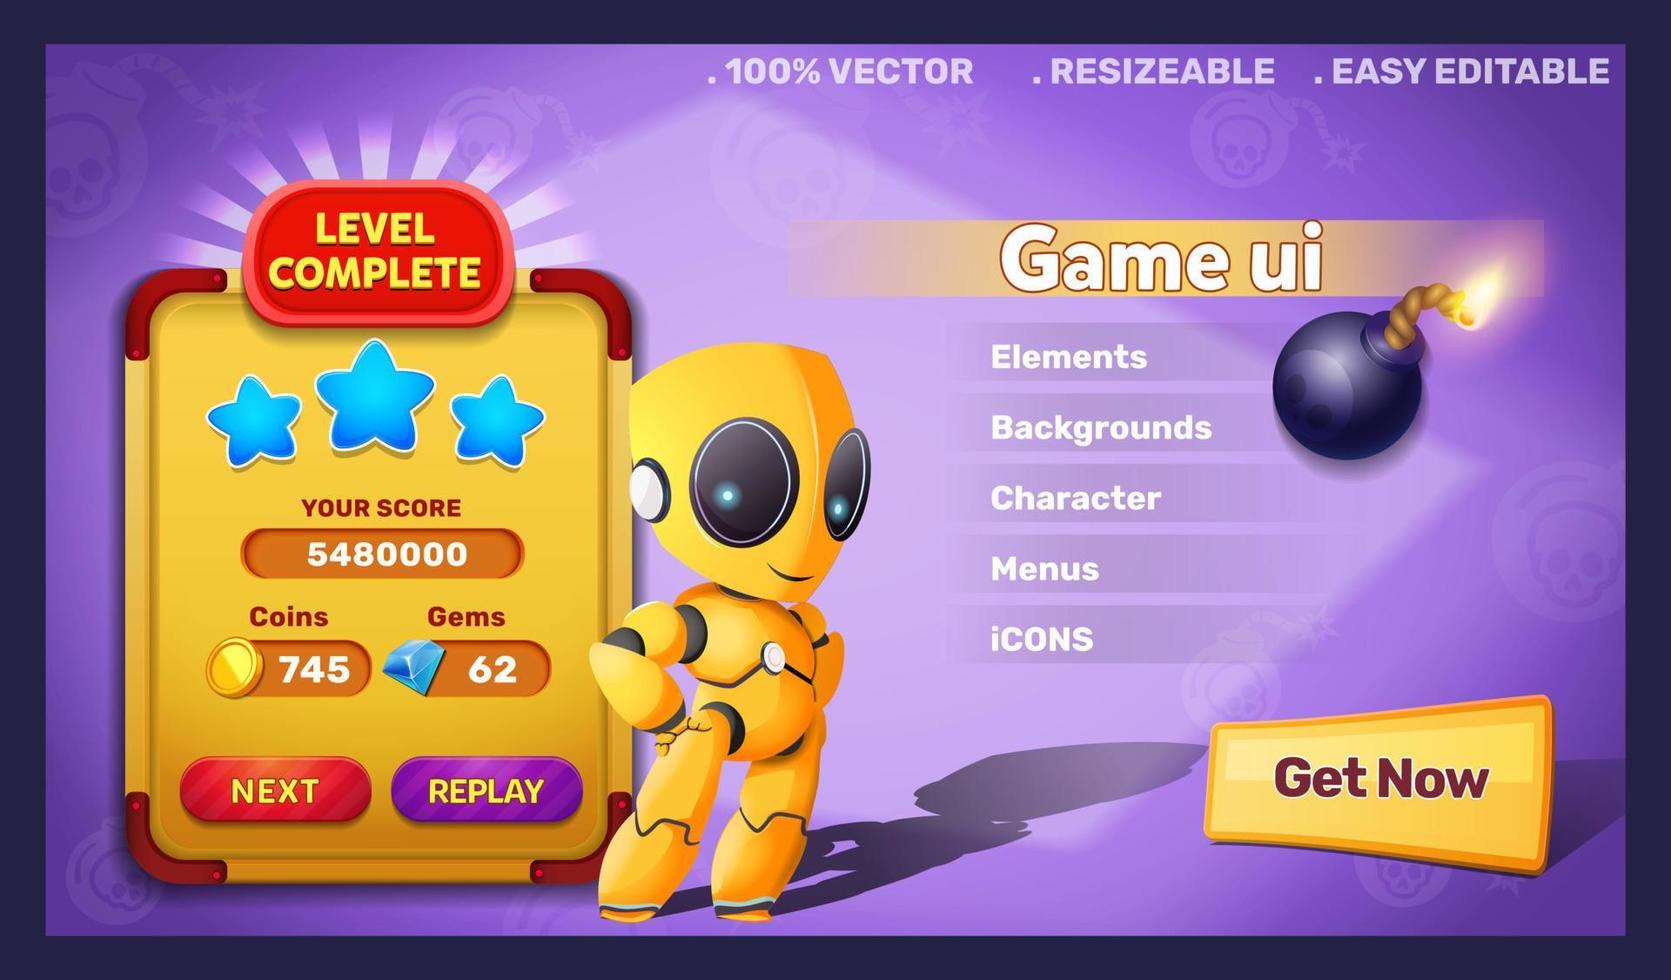 Game UI menu popups with buttons and game assets vector